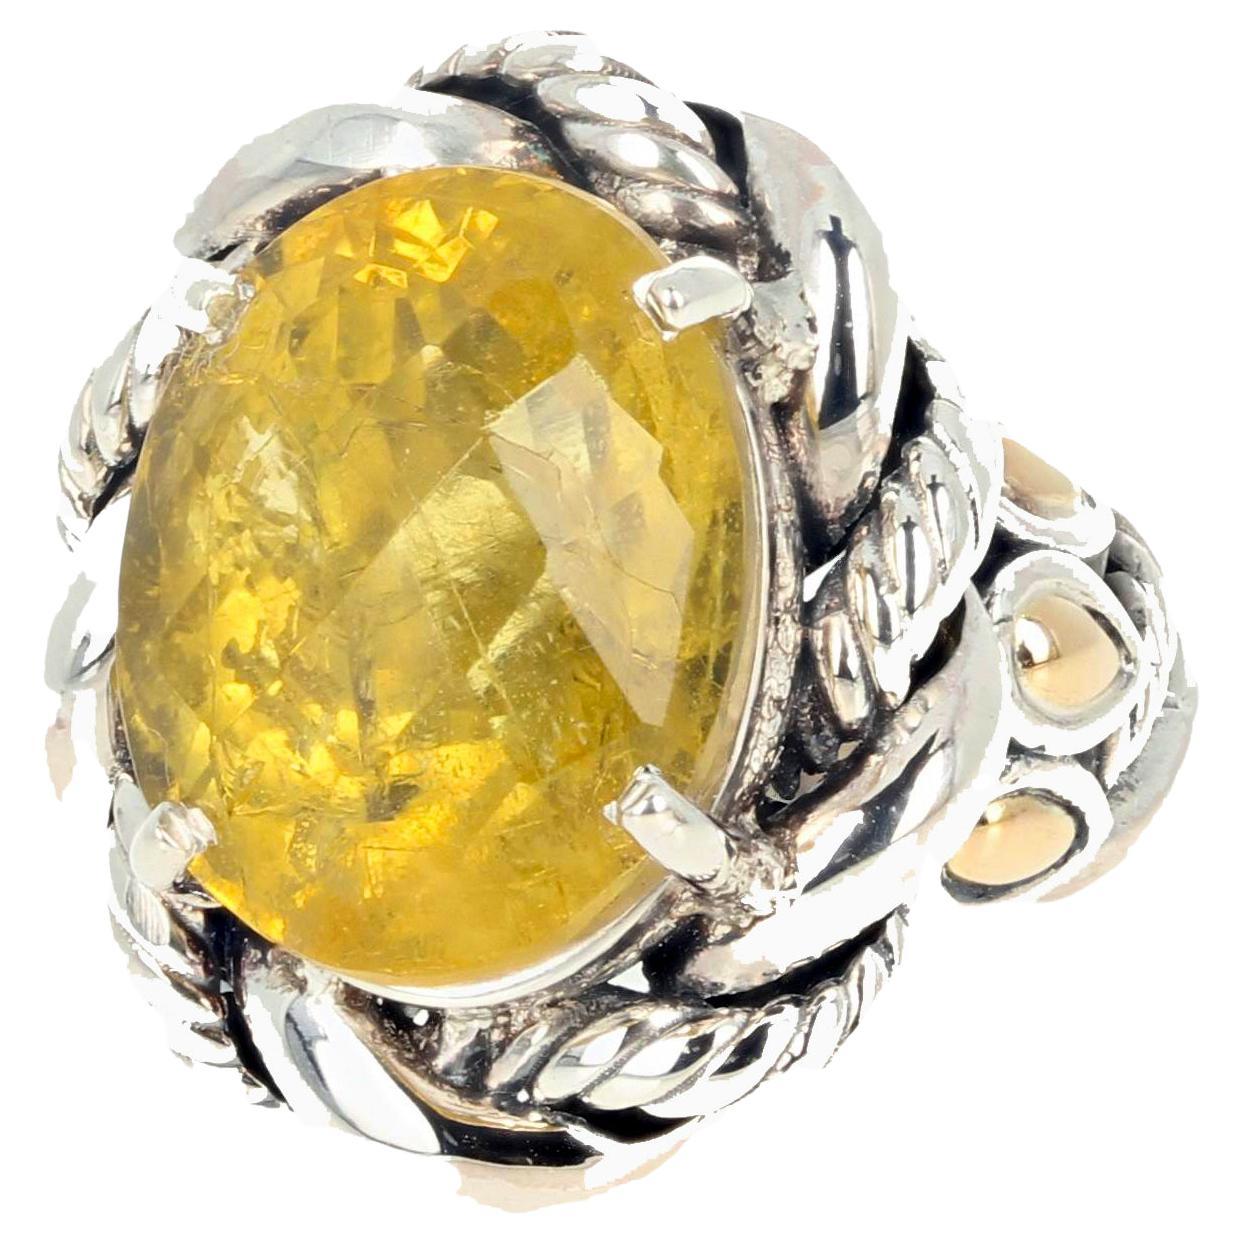 This fascinating ring is 6.84 carats of foggy but glittery natural checkerboard gem cut oval yellow Beryl.  The flecks of inclusions in this gemstone are what makes it so beautiful and different.  This is sterling silver with goldy tear drops down